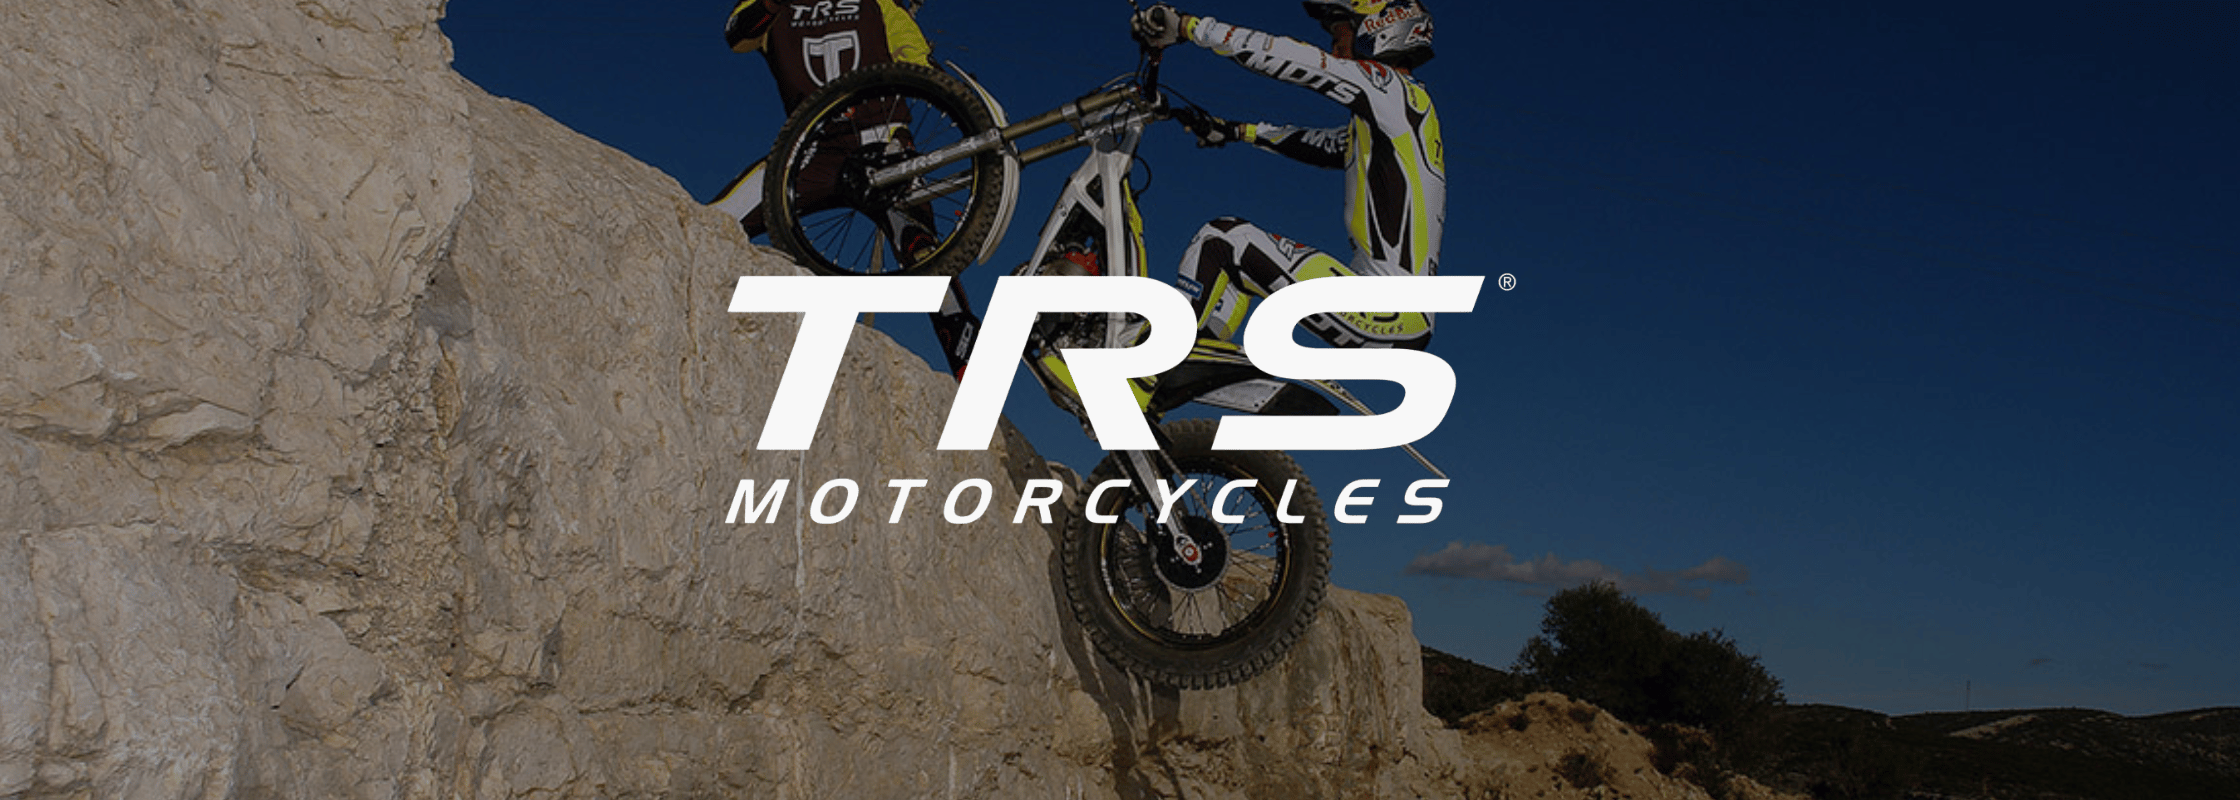 TRS Motorcycle Trials Bikes for Sale Barnsley South Yorkshire